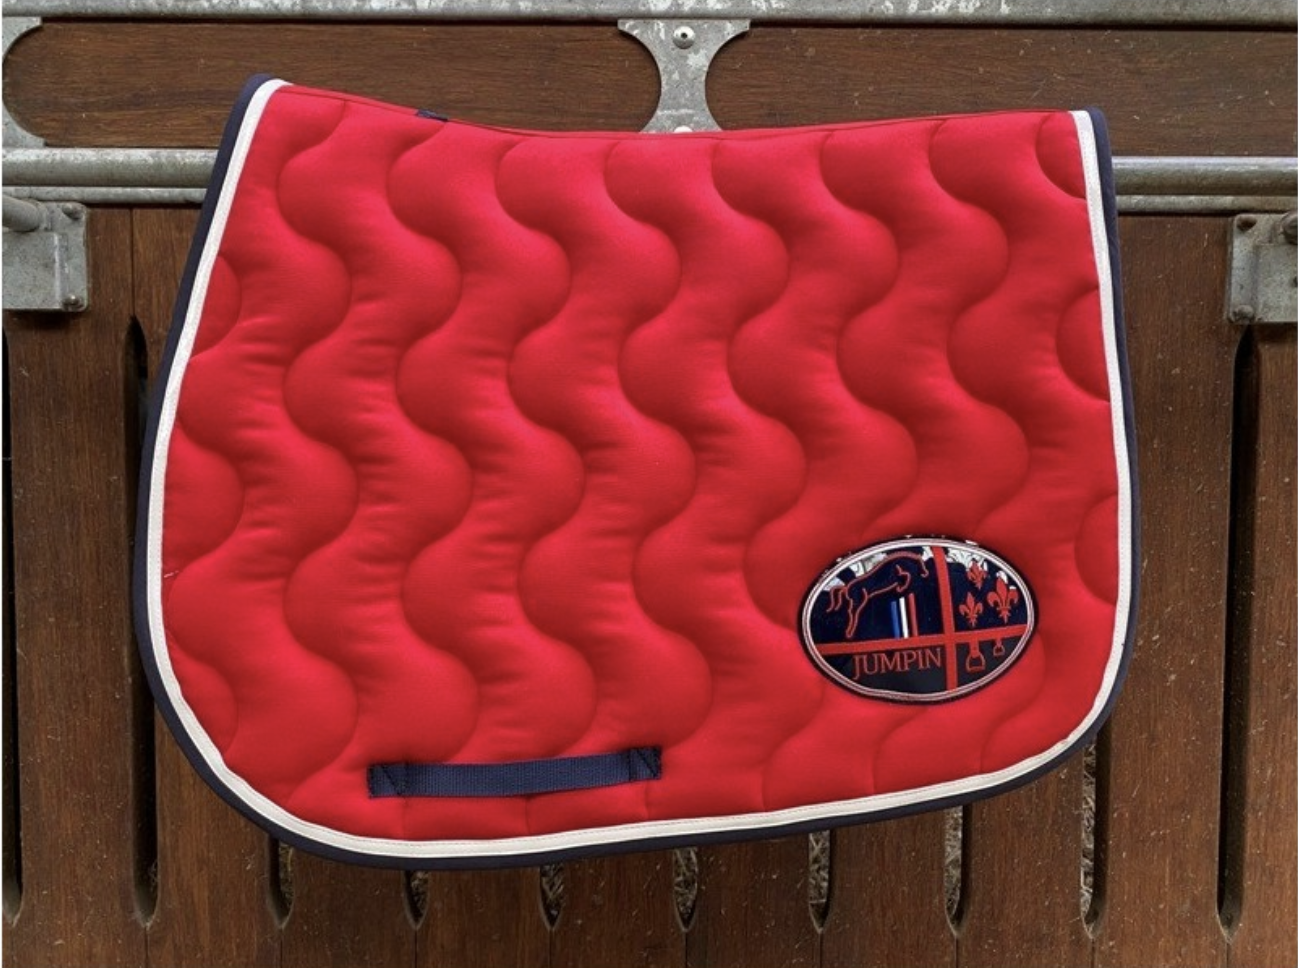 Tapis de selle Rouge / Blanc / Marine by JUMP'IN